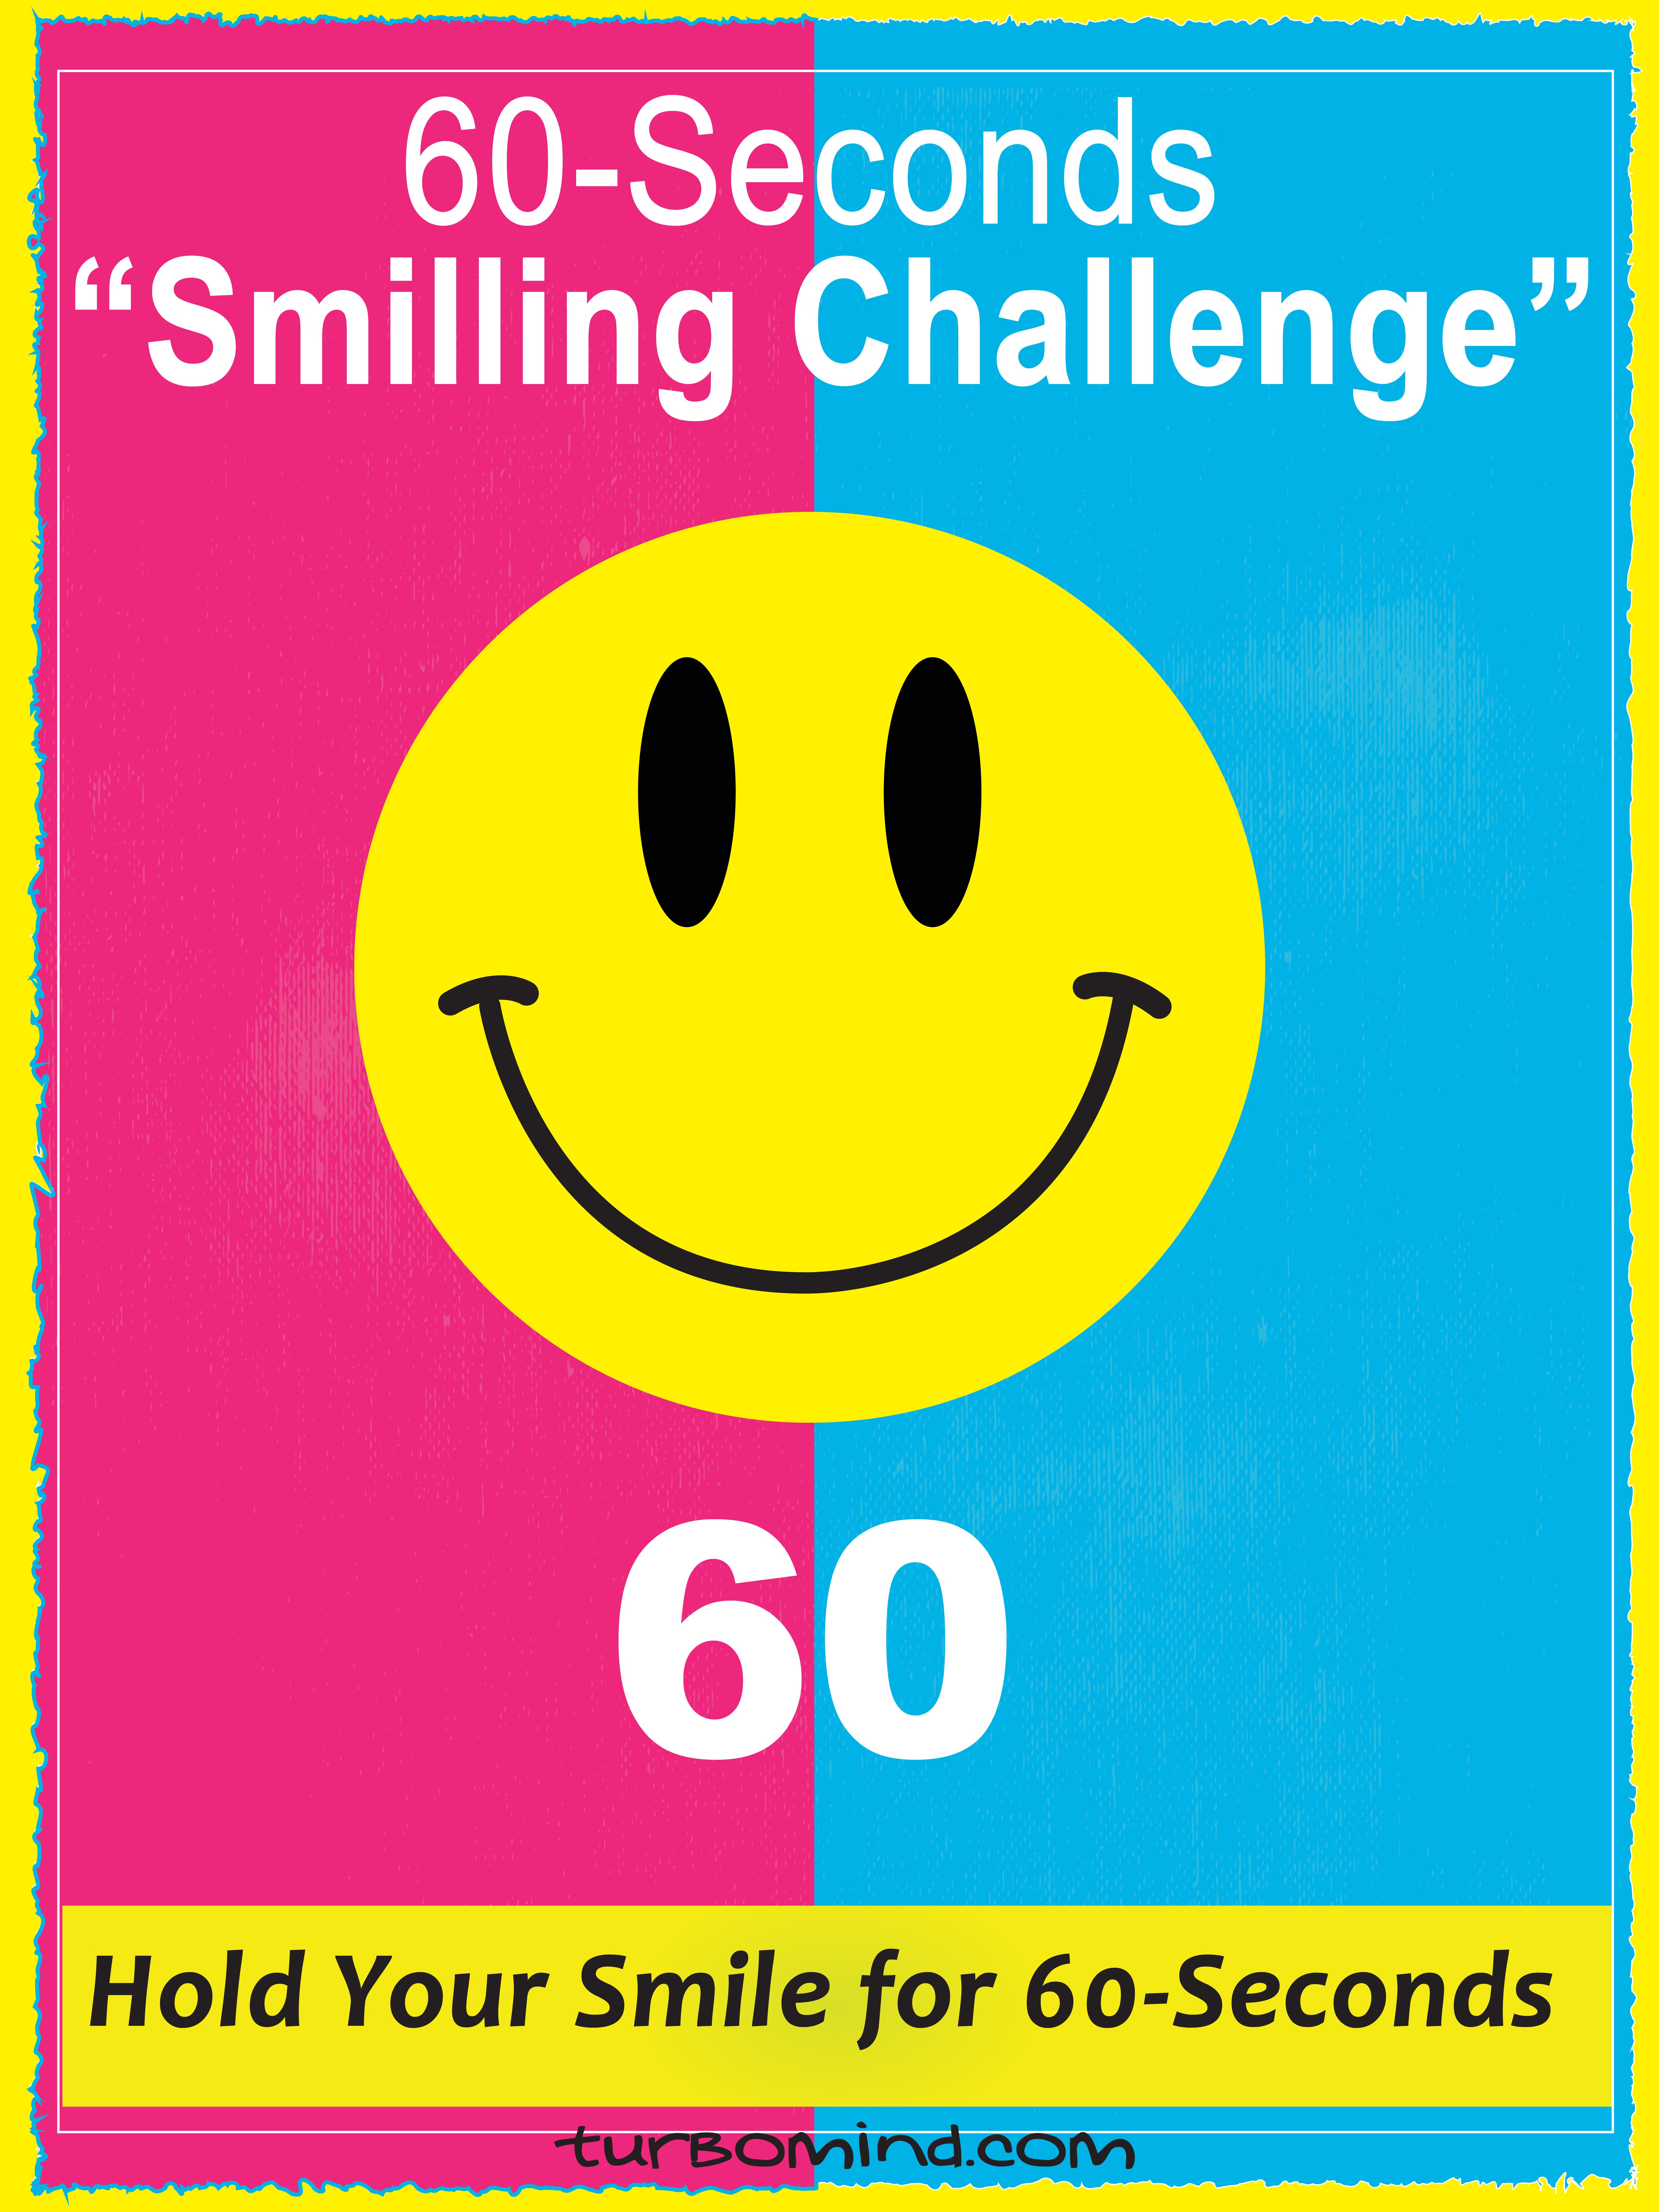 TURBOMIND #14, “60-Seconds Smiling Challenge”